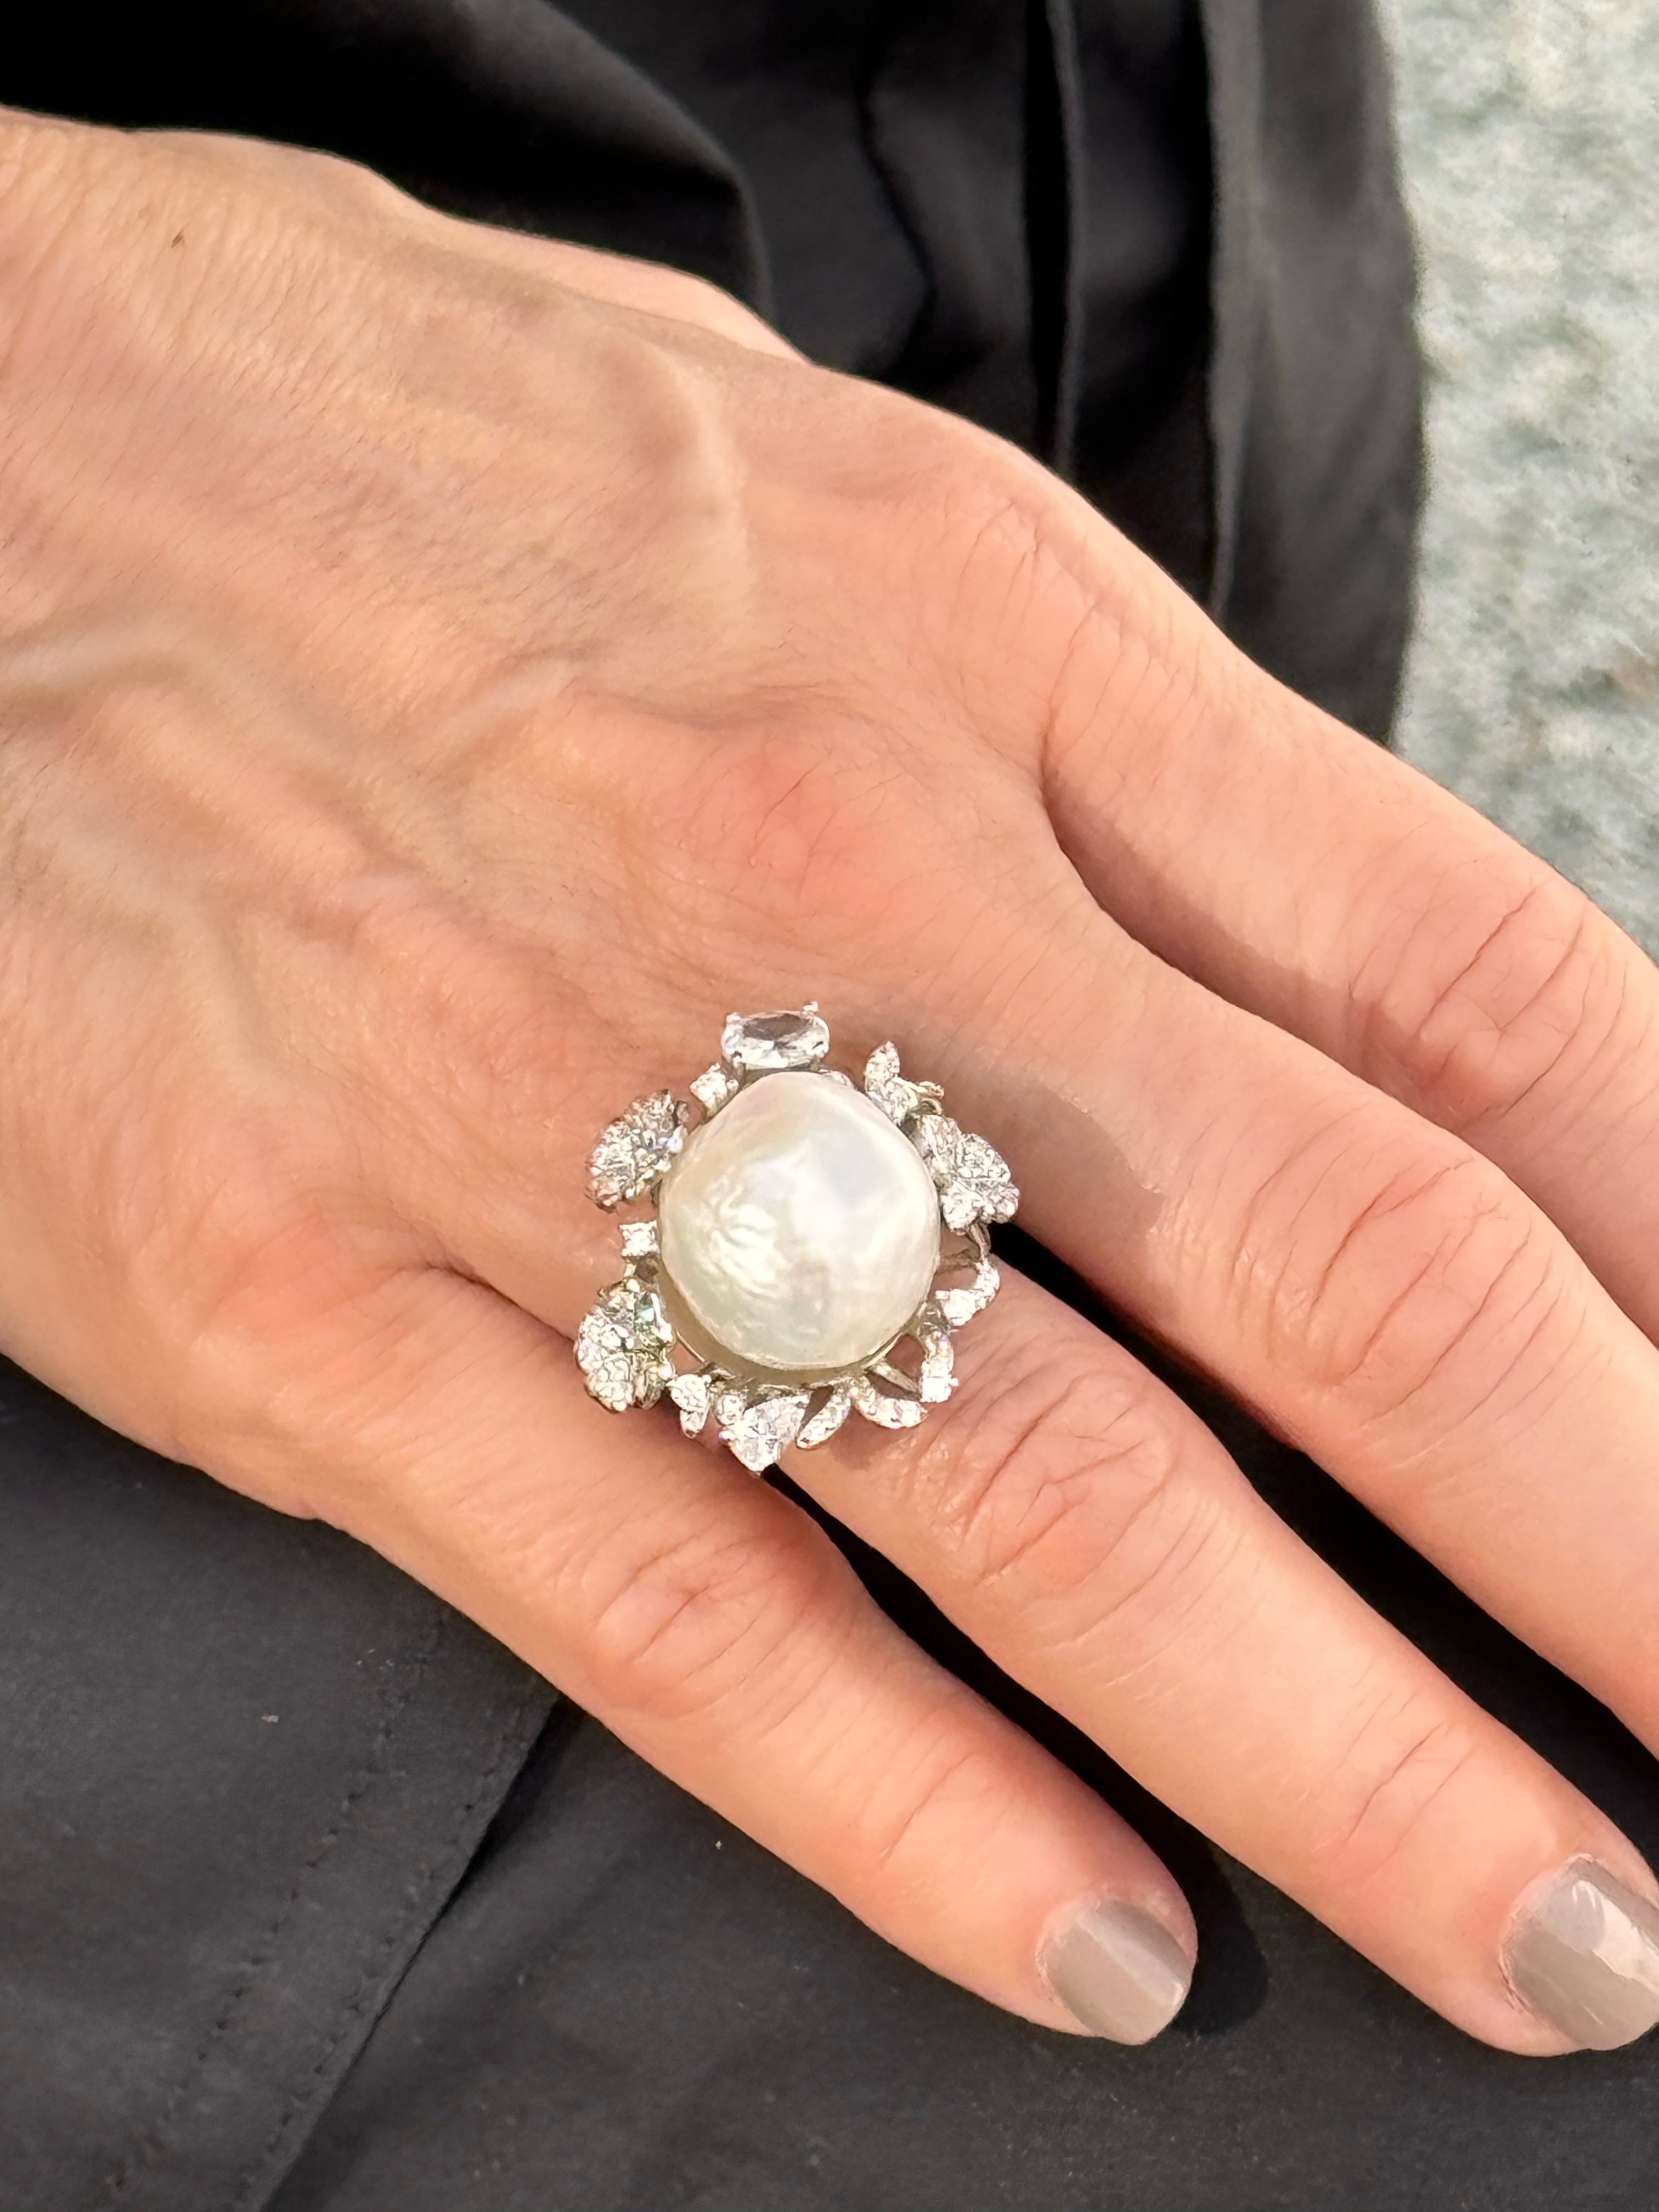 Pearl Bloom Size 8.5 US Stunning Pearl Ring With Flower Setting Matching  Earrings and Pendant Also Available Worldwide Shipping - Etsy